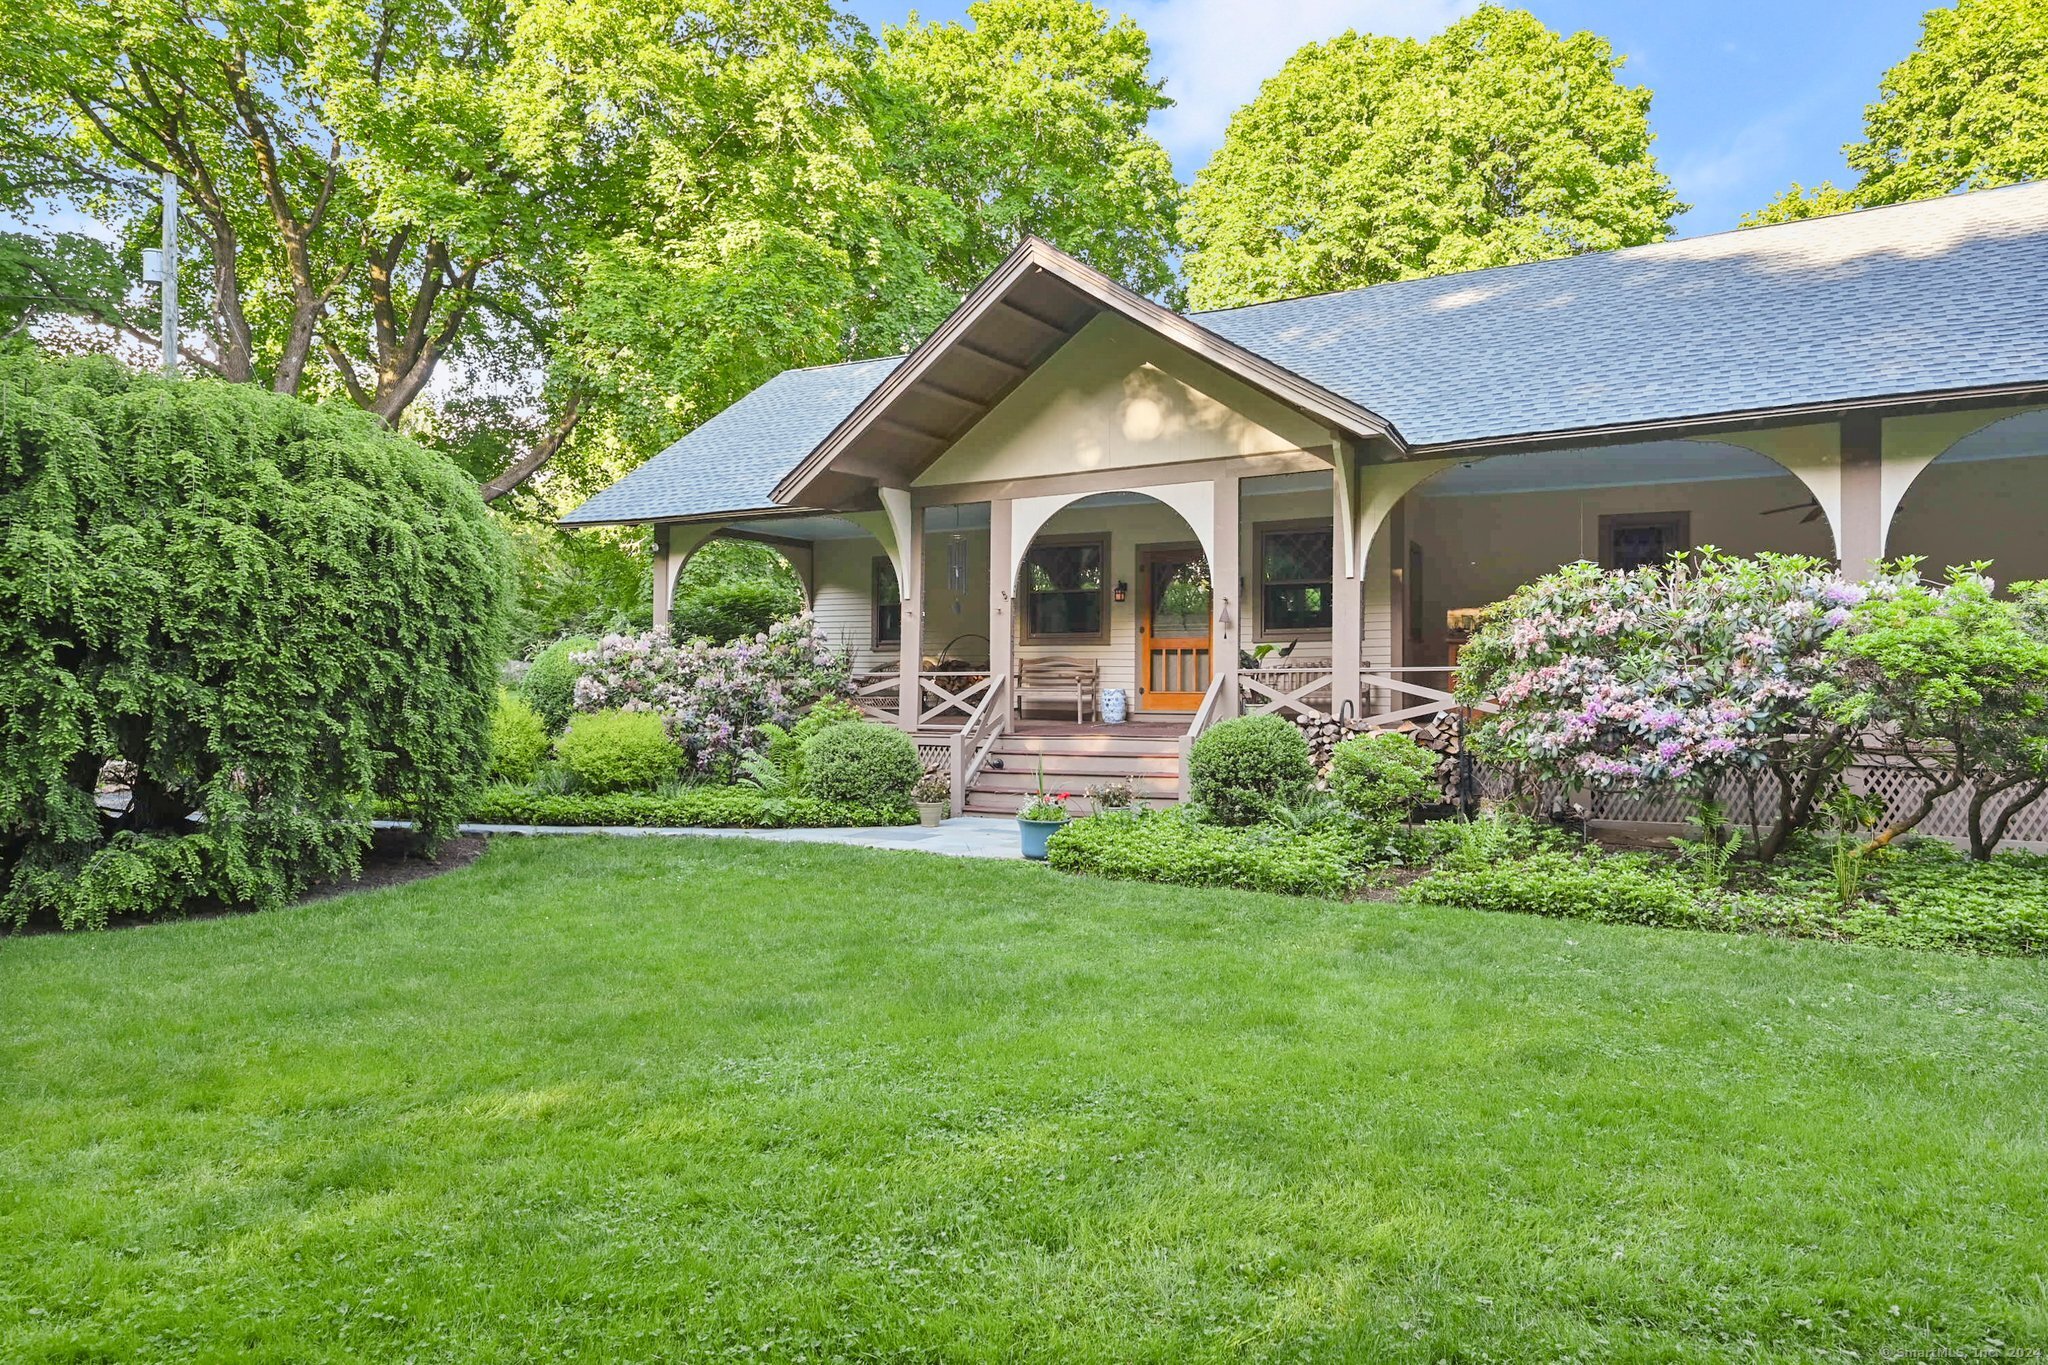 One of the earliest known surviving examples of Craftsman architecture in Redding, this rambling 1906 ARTS&CRAFTS home, w/ 2003, 2, 000-sf addition. 7+ private level acres w/professional landscaping. English cottage style diamond paned windows; hand-cut mission woodwork; board & batten wainscoting; irregular rooflines; overhanging eaves and a 72' front porch. 4 original floor-to-ceiling fieldstone fireplaces in the spacious Living, Dining & Music rooms. Cozy Library/Office w/built-in bookshelves. Large sunny country Kitchen w/white leaded glass front cabinets; island; limestone counters; stainless appliances; adjacent butler's pantry & milled antique barn wood floor. Oversized main floor primary Bedroom suite w/french doors to patio overlooking back property, Brazilian cherry floor; travertine marble in bath, dressing area plus 2 walk-in closets. 2 staircases to add'l Bedrooms plus a Playroom/Office & a 38' wood paneled Game room. Outbuildings include a detached 2-car garage & workshop w/1-bedroom apartment above, well house, garden shed, bunk house. Charming original raised stone patio, stone walls, specimen & fruit trees, perennial gardens including iris and peony, fenced vegetable garden w/raised beds & potential pool sites; possible horse property. Walk to Lonetown Marsh for birdwatching & winter ice skating and concerts on the green at Town Center. This enchanting, very peaceful country retreat is minutes from trains, shops, restaurants and only 60 miles from NYC.